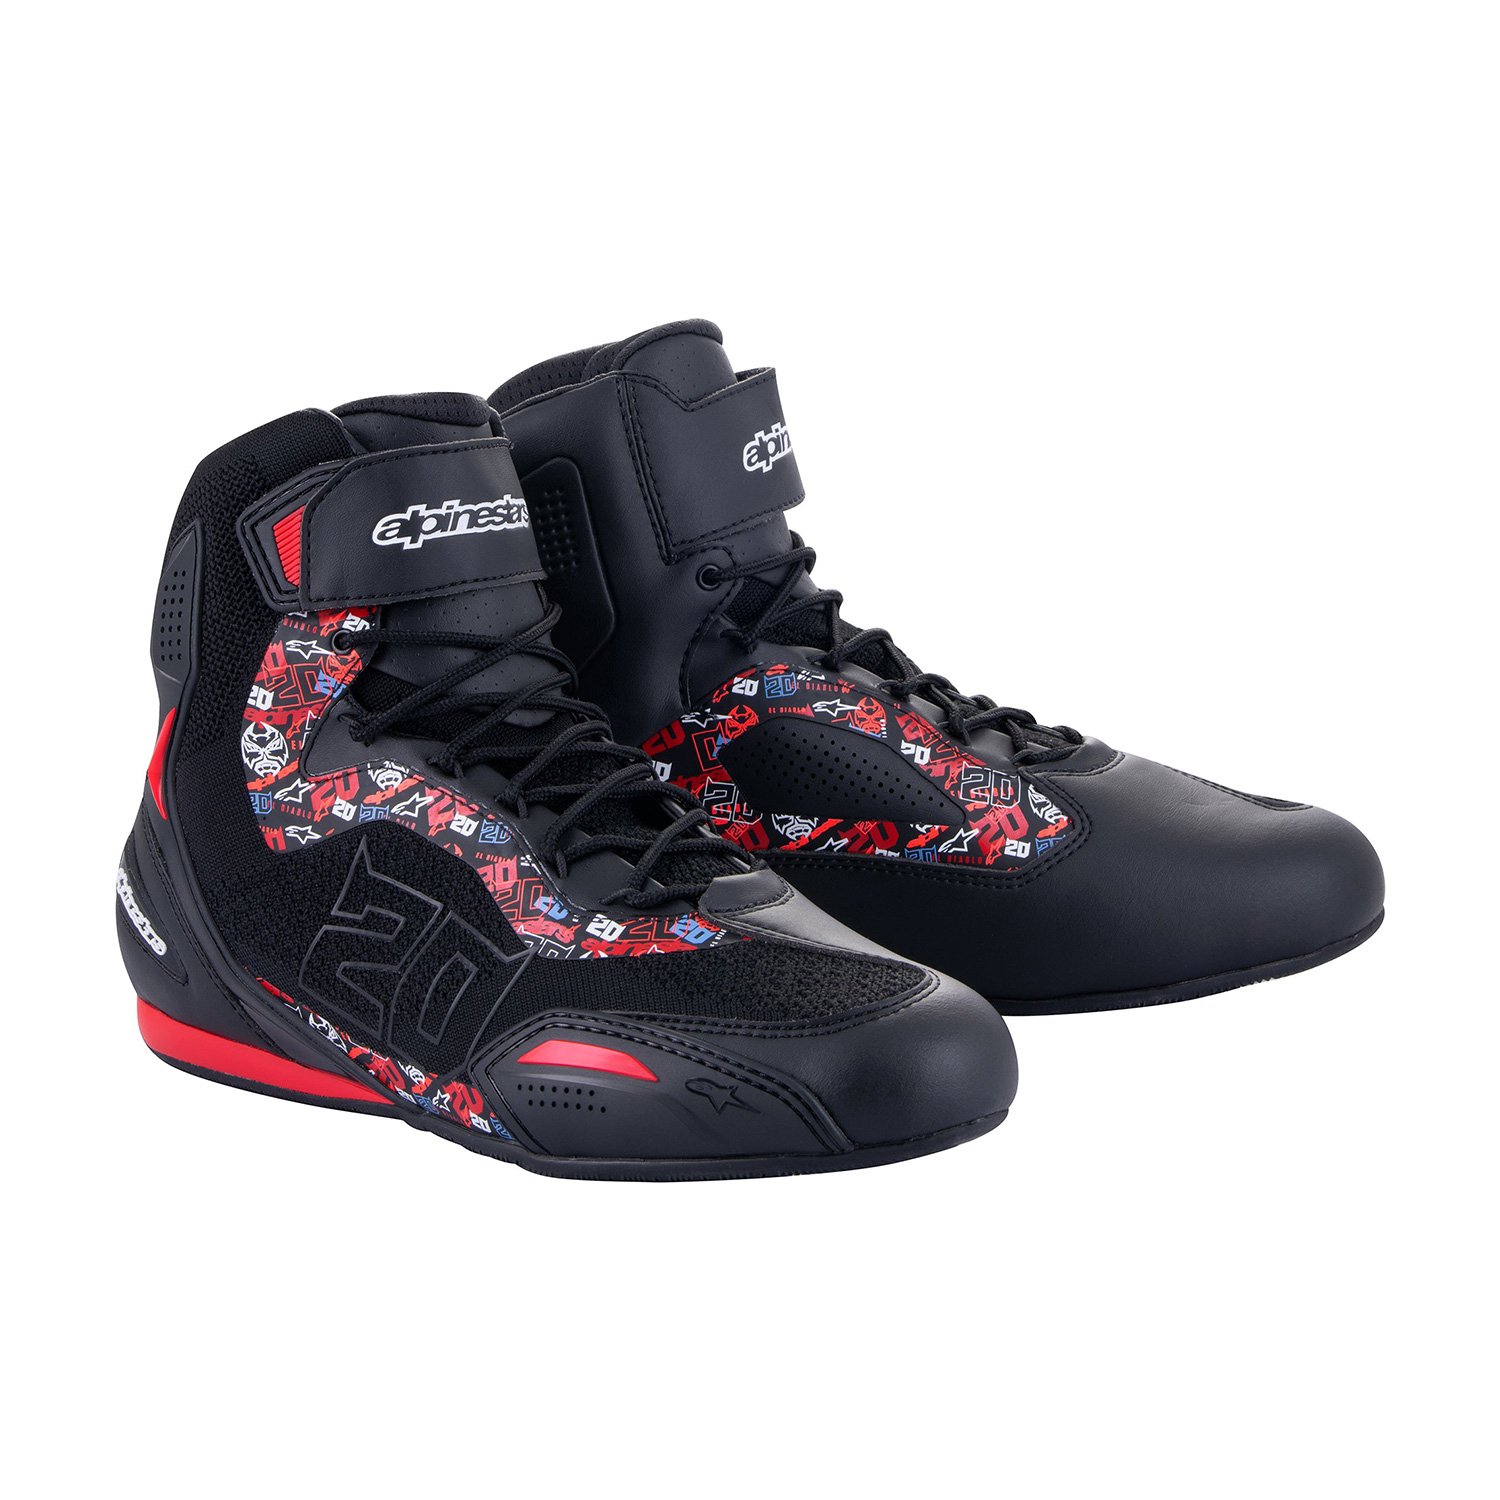 Image of Alpinestars FQ20 Faster-3 Rideknit Noir Bright Rouge Chaussures Taille US 11